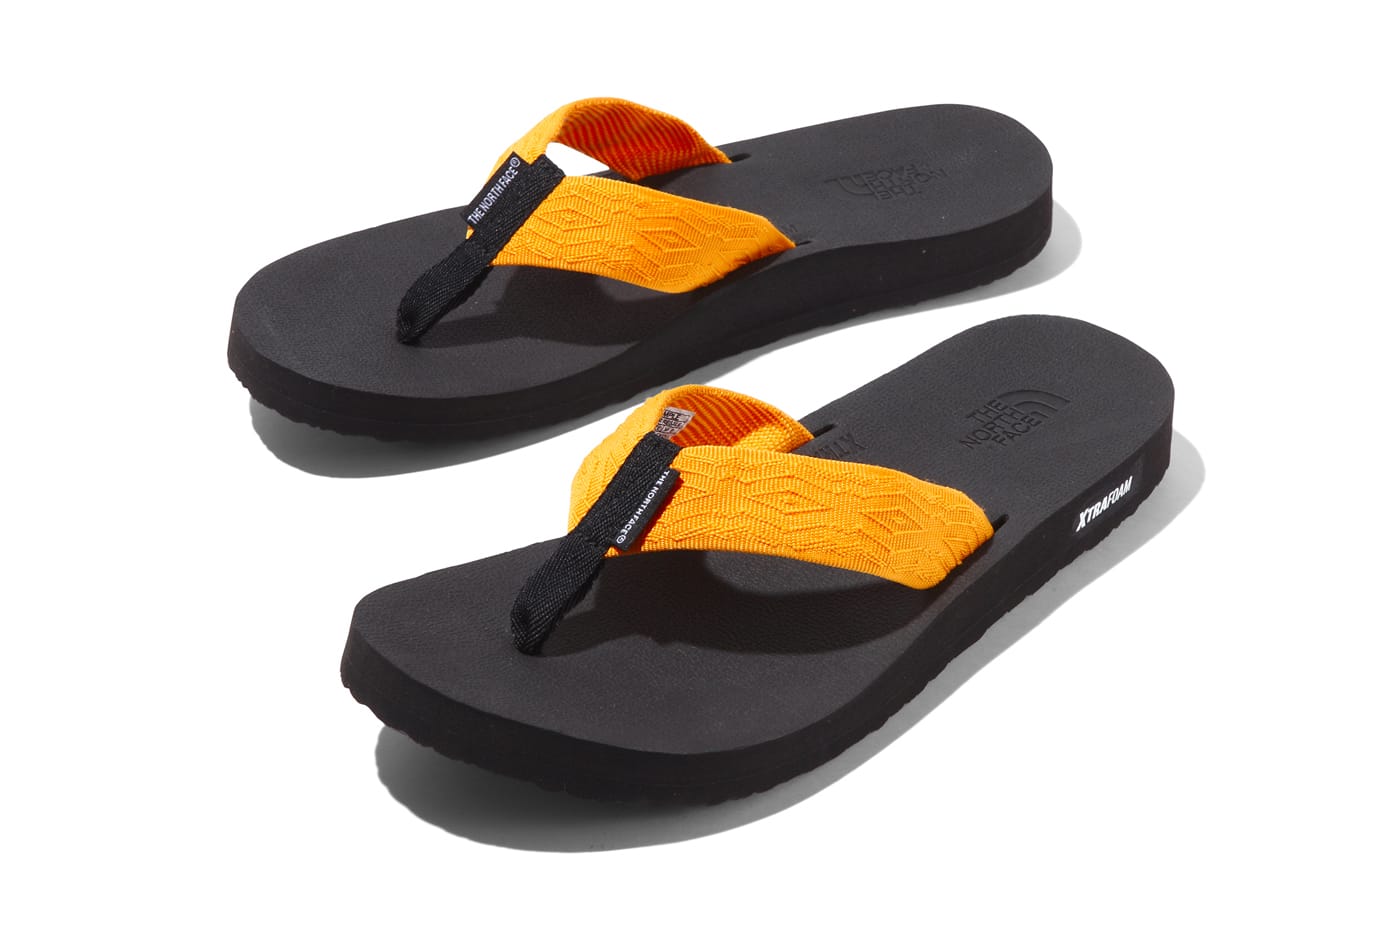 flip flops the north face